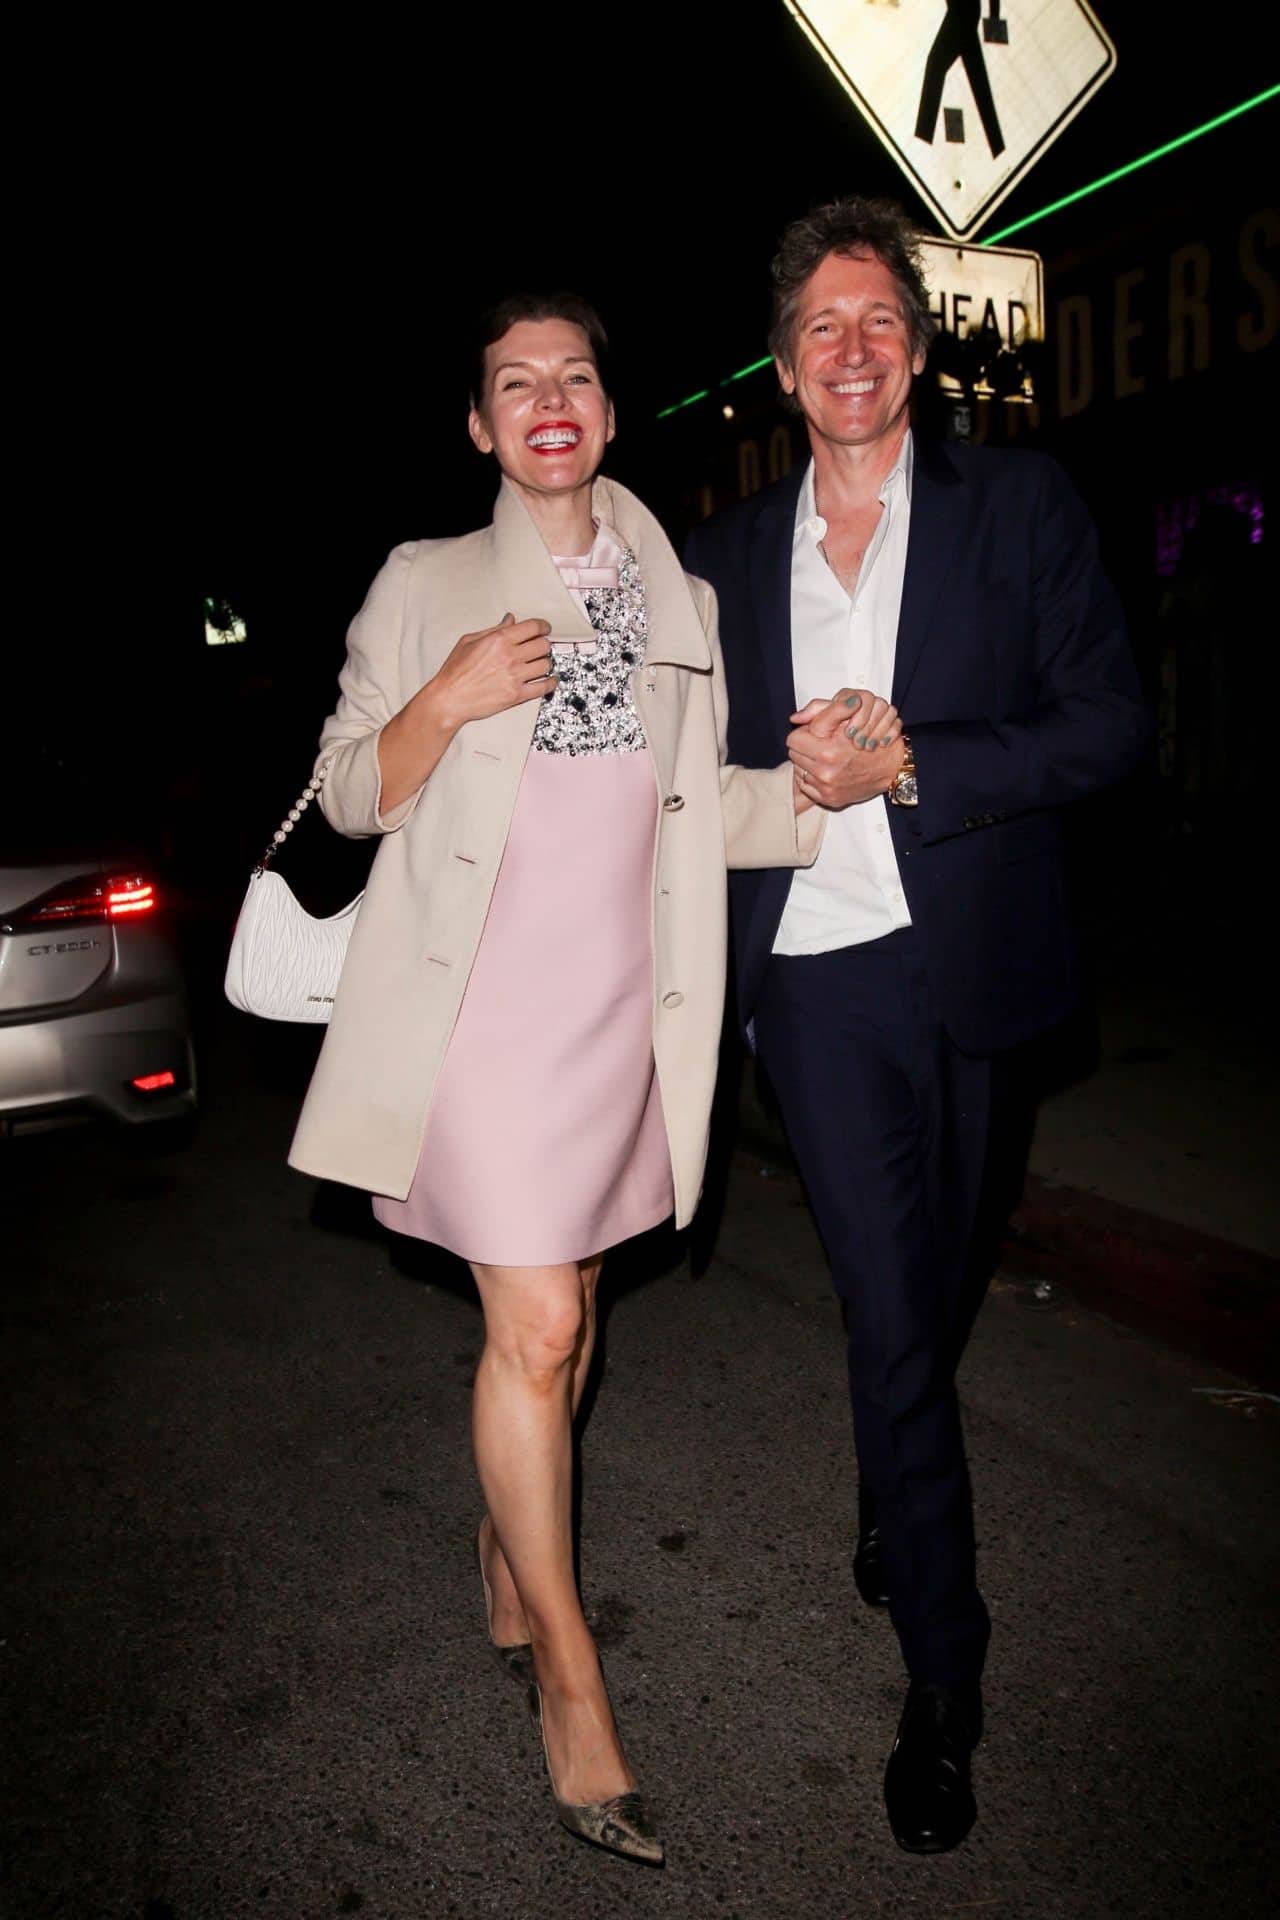 Milla Jovovich Stuns with her Glowing Smile and Pink Dress at Prada Event